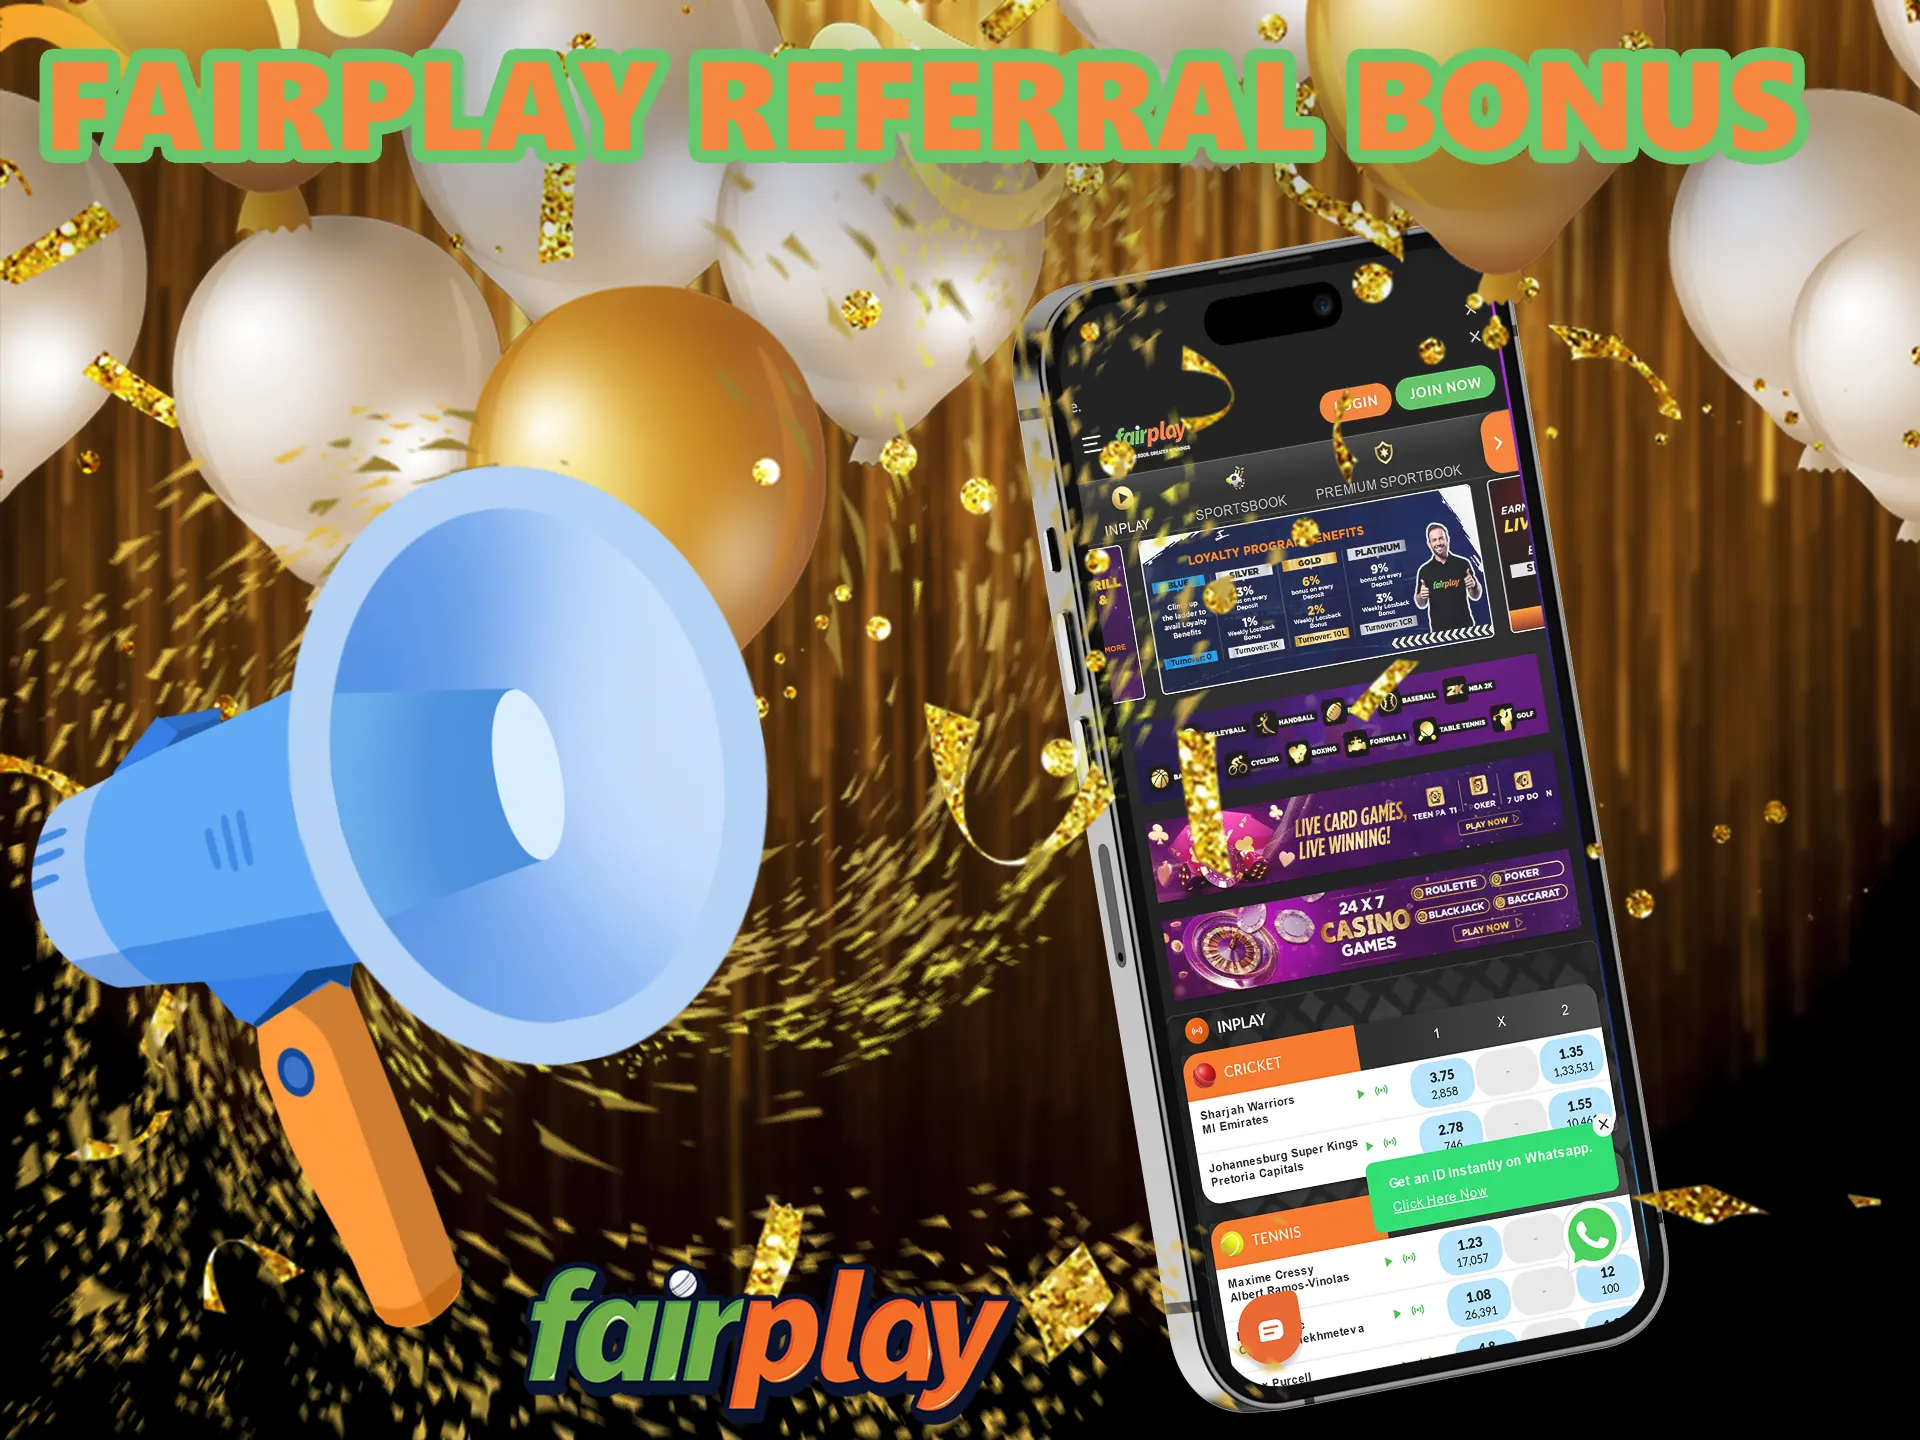 Every player from India has a chance to participate in the Fairplay referral code, in order to get it you need to attract a new user to the platform.